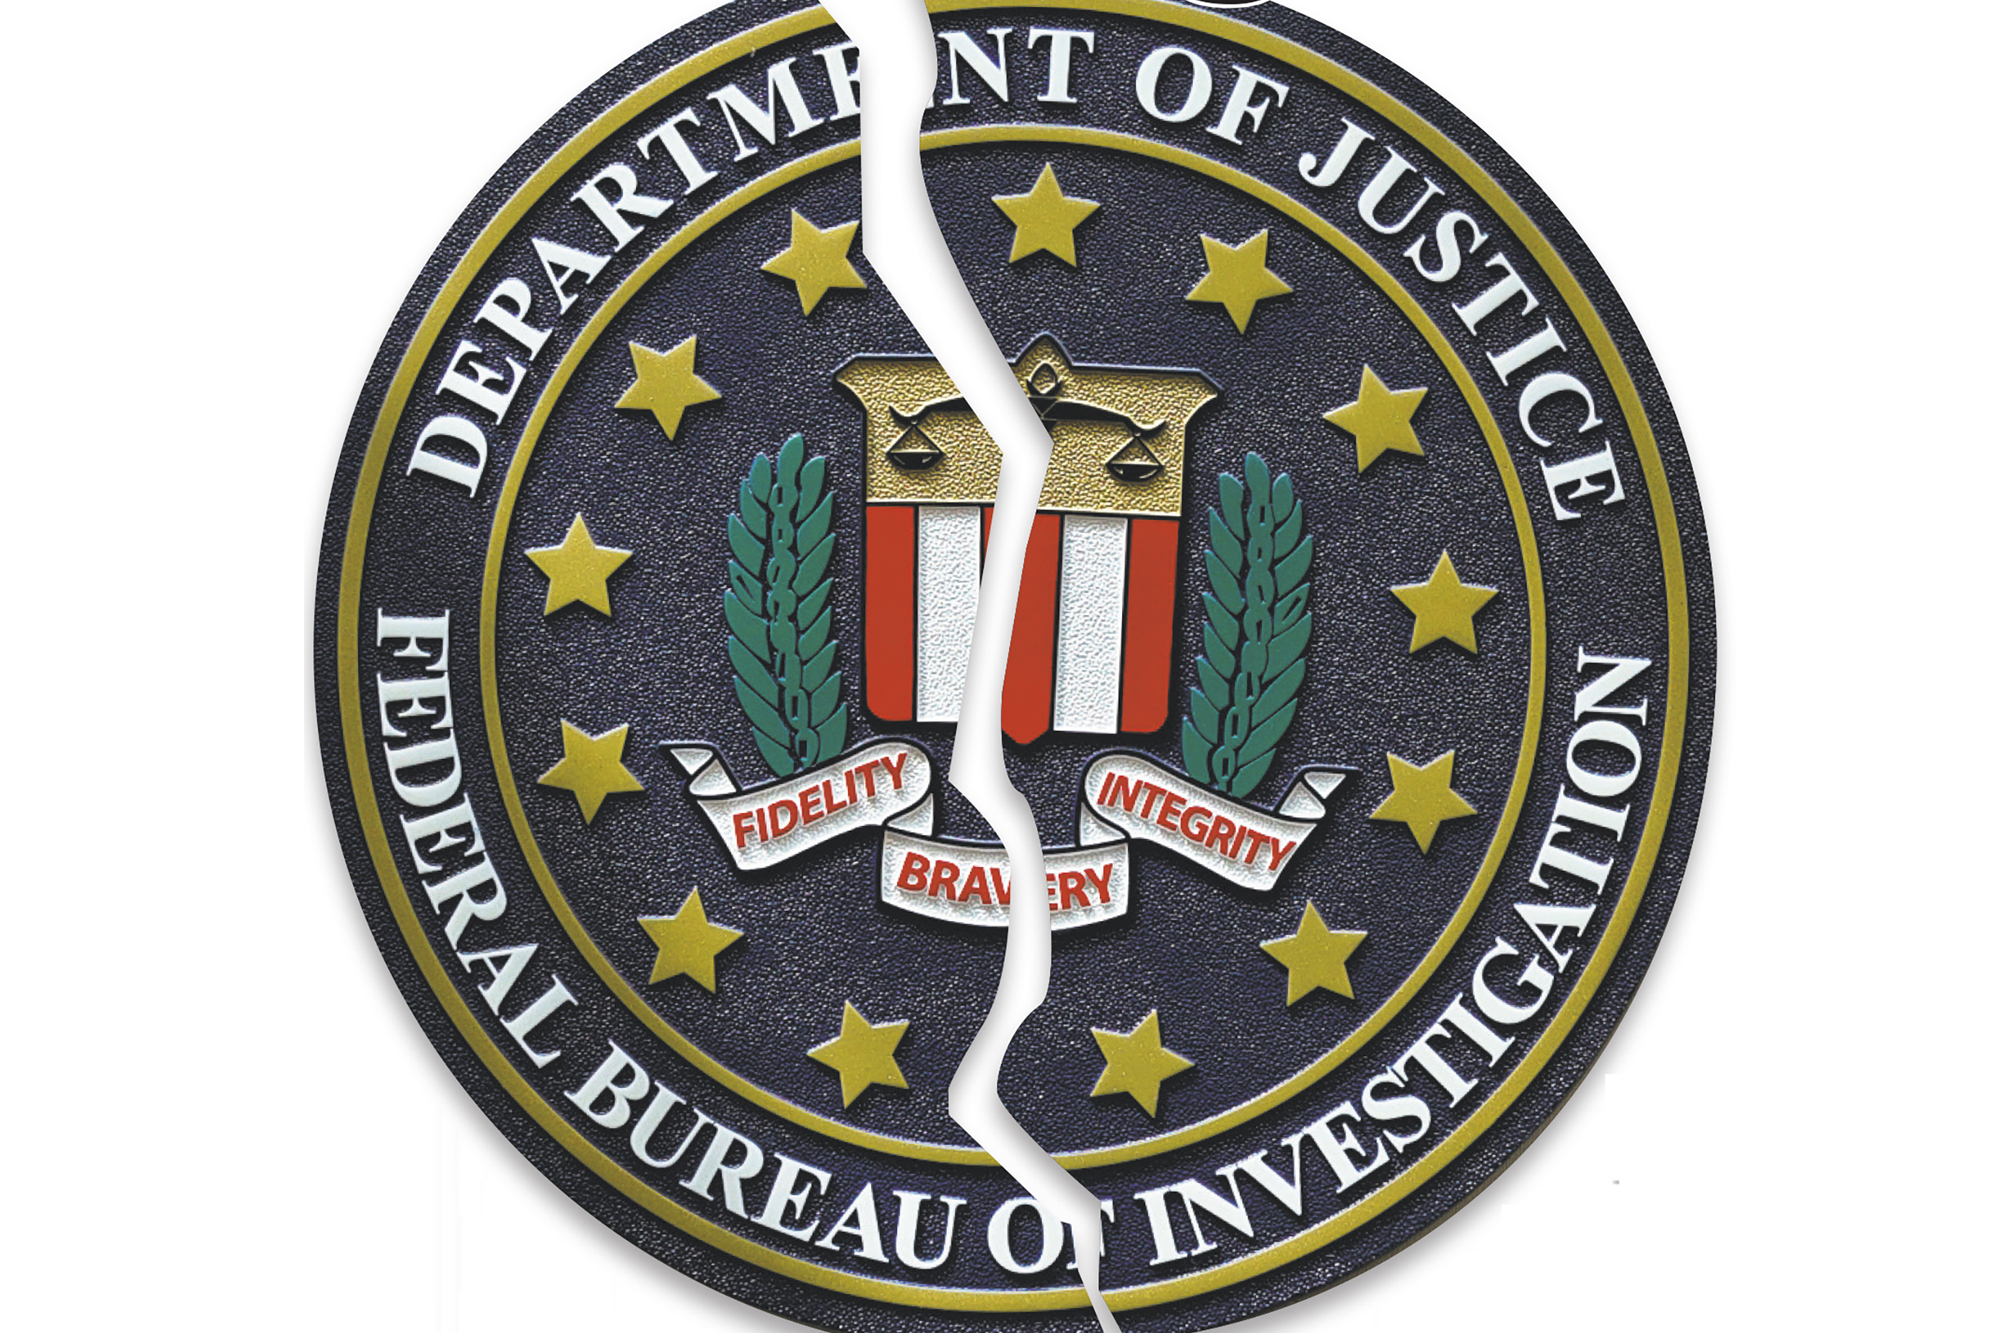 The FBI is no longer recruiting the “best and brightest” to be special agents, but selecting candidates based on “race, gender and/or sexual orientation.”?